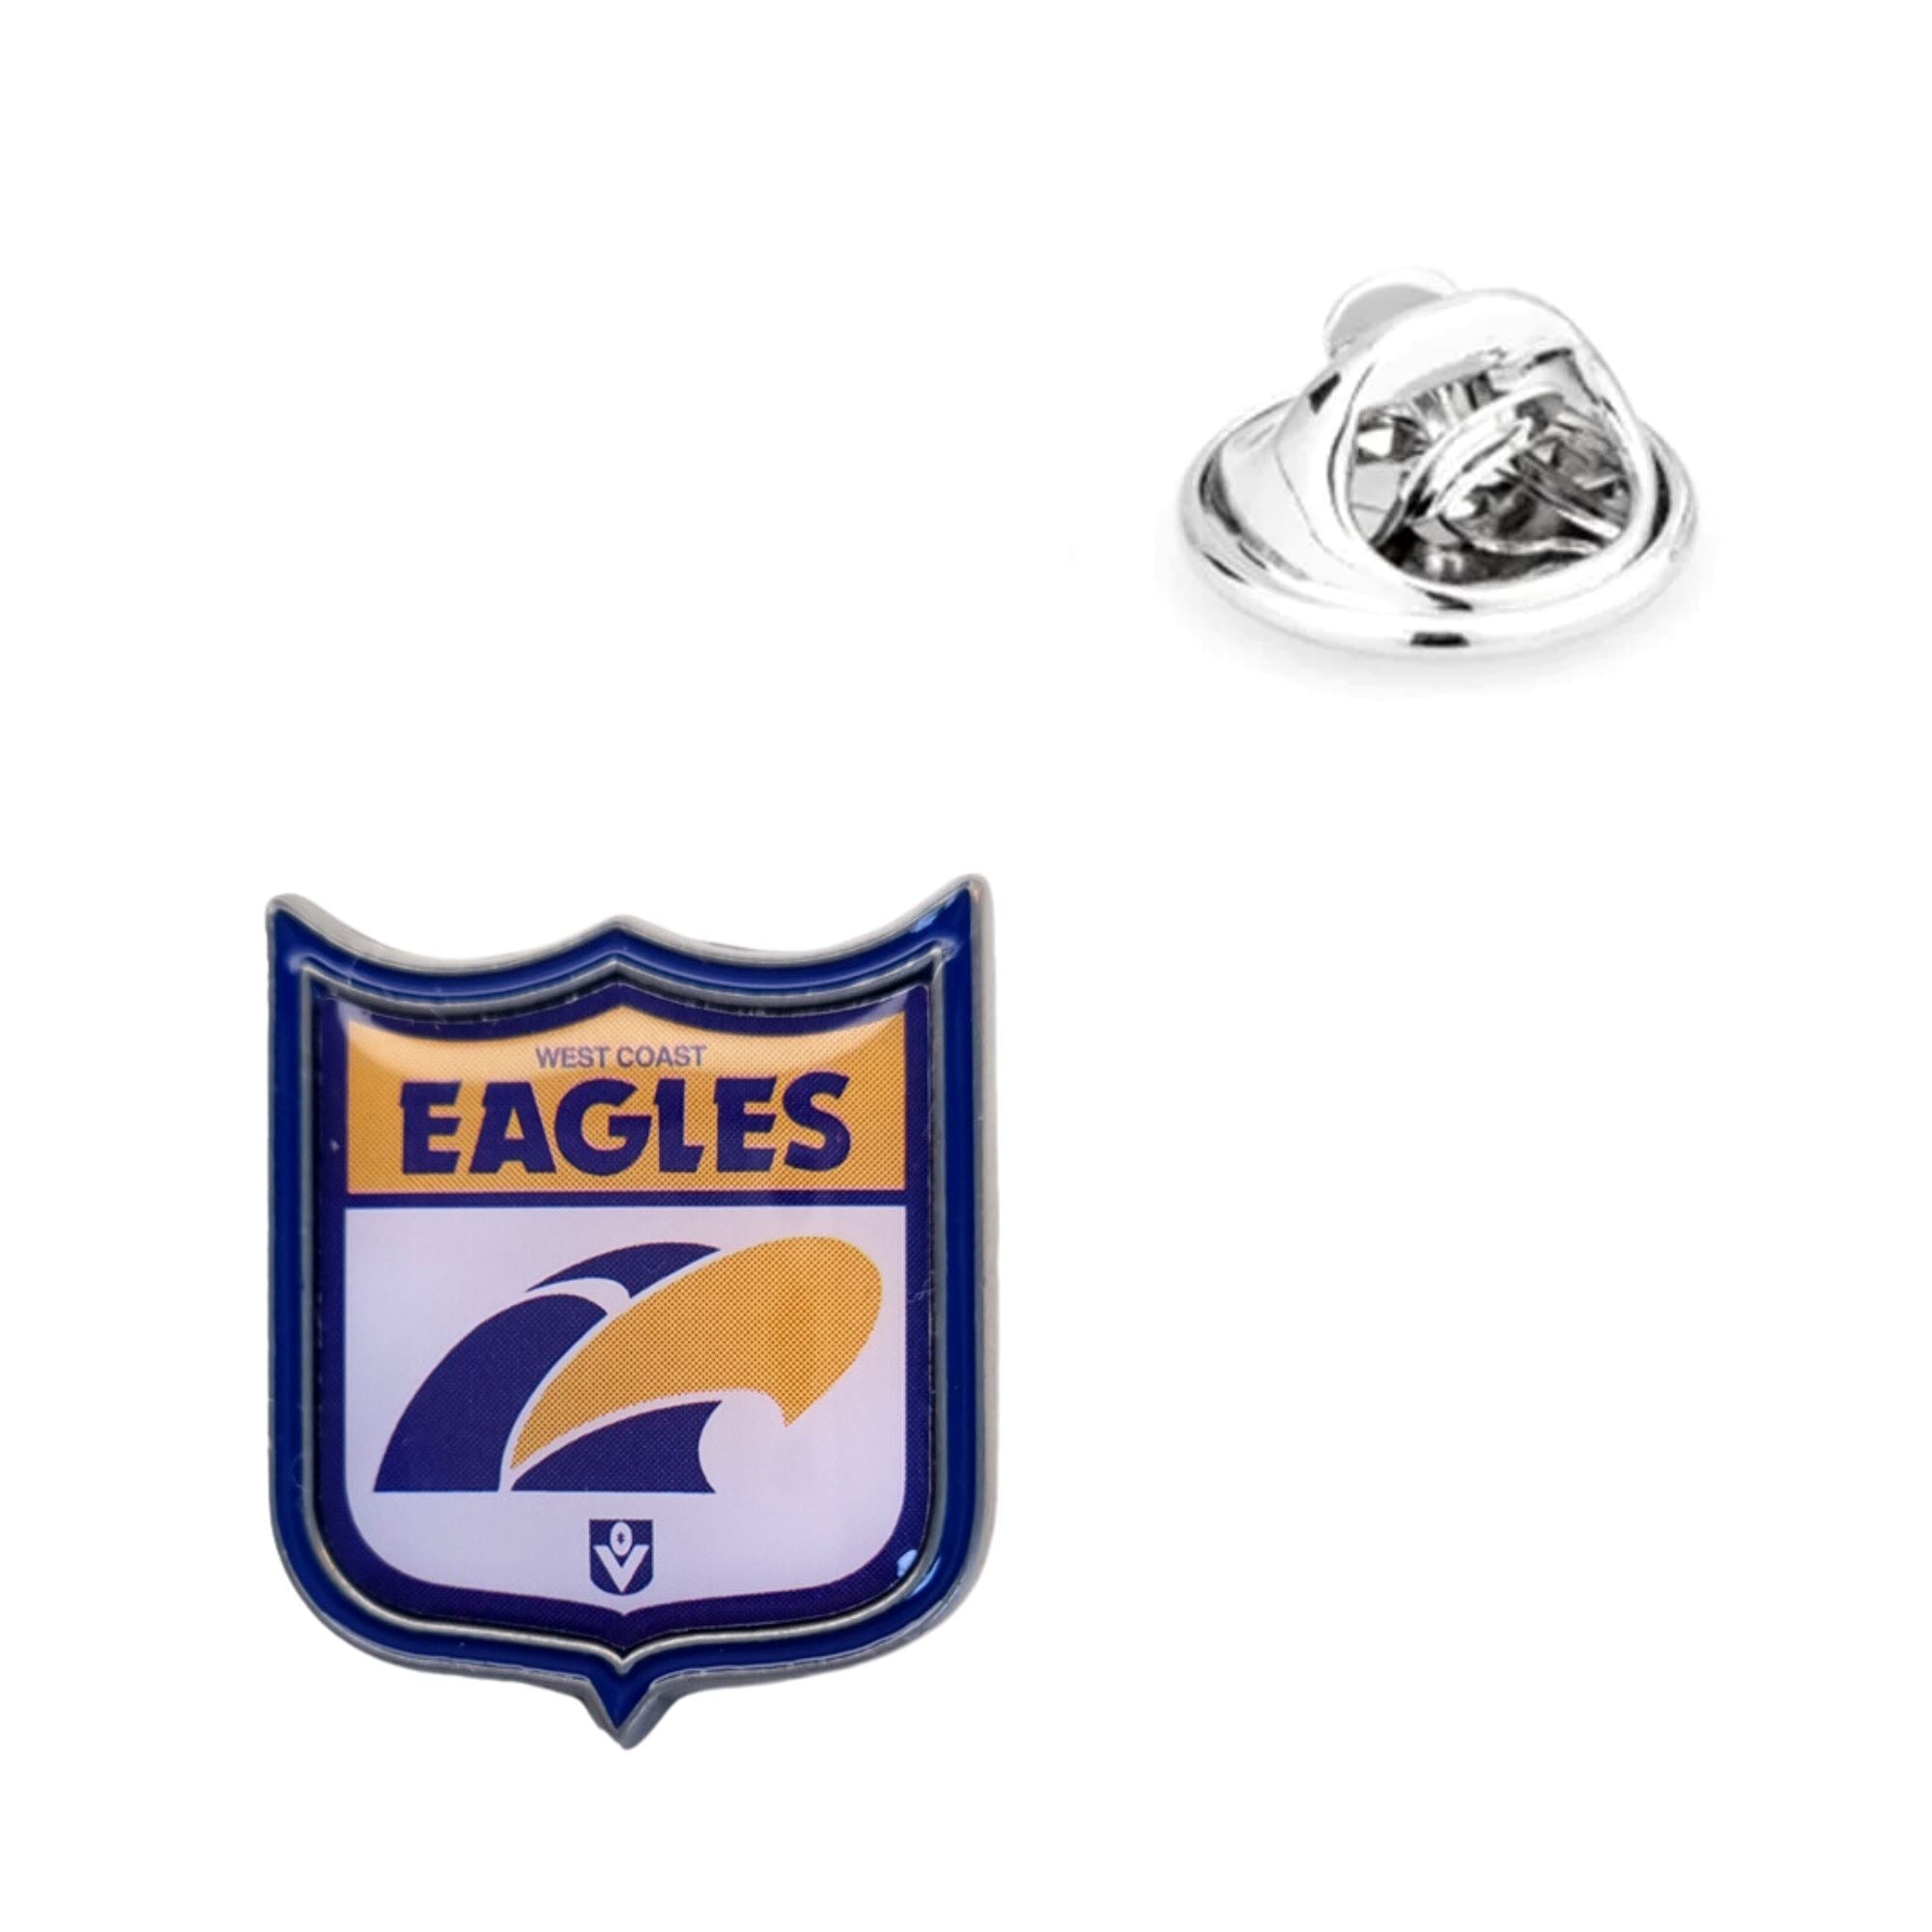 West Coast Eagles AFL Heritage Pin Lapel Pin Clinks 